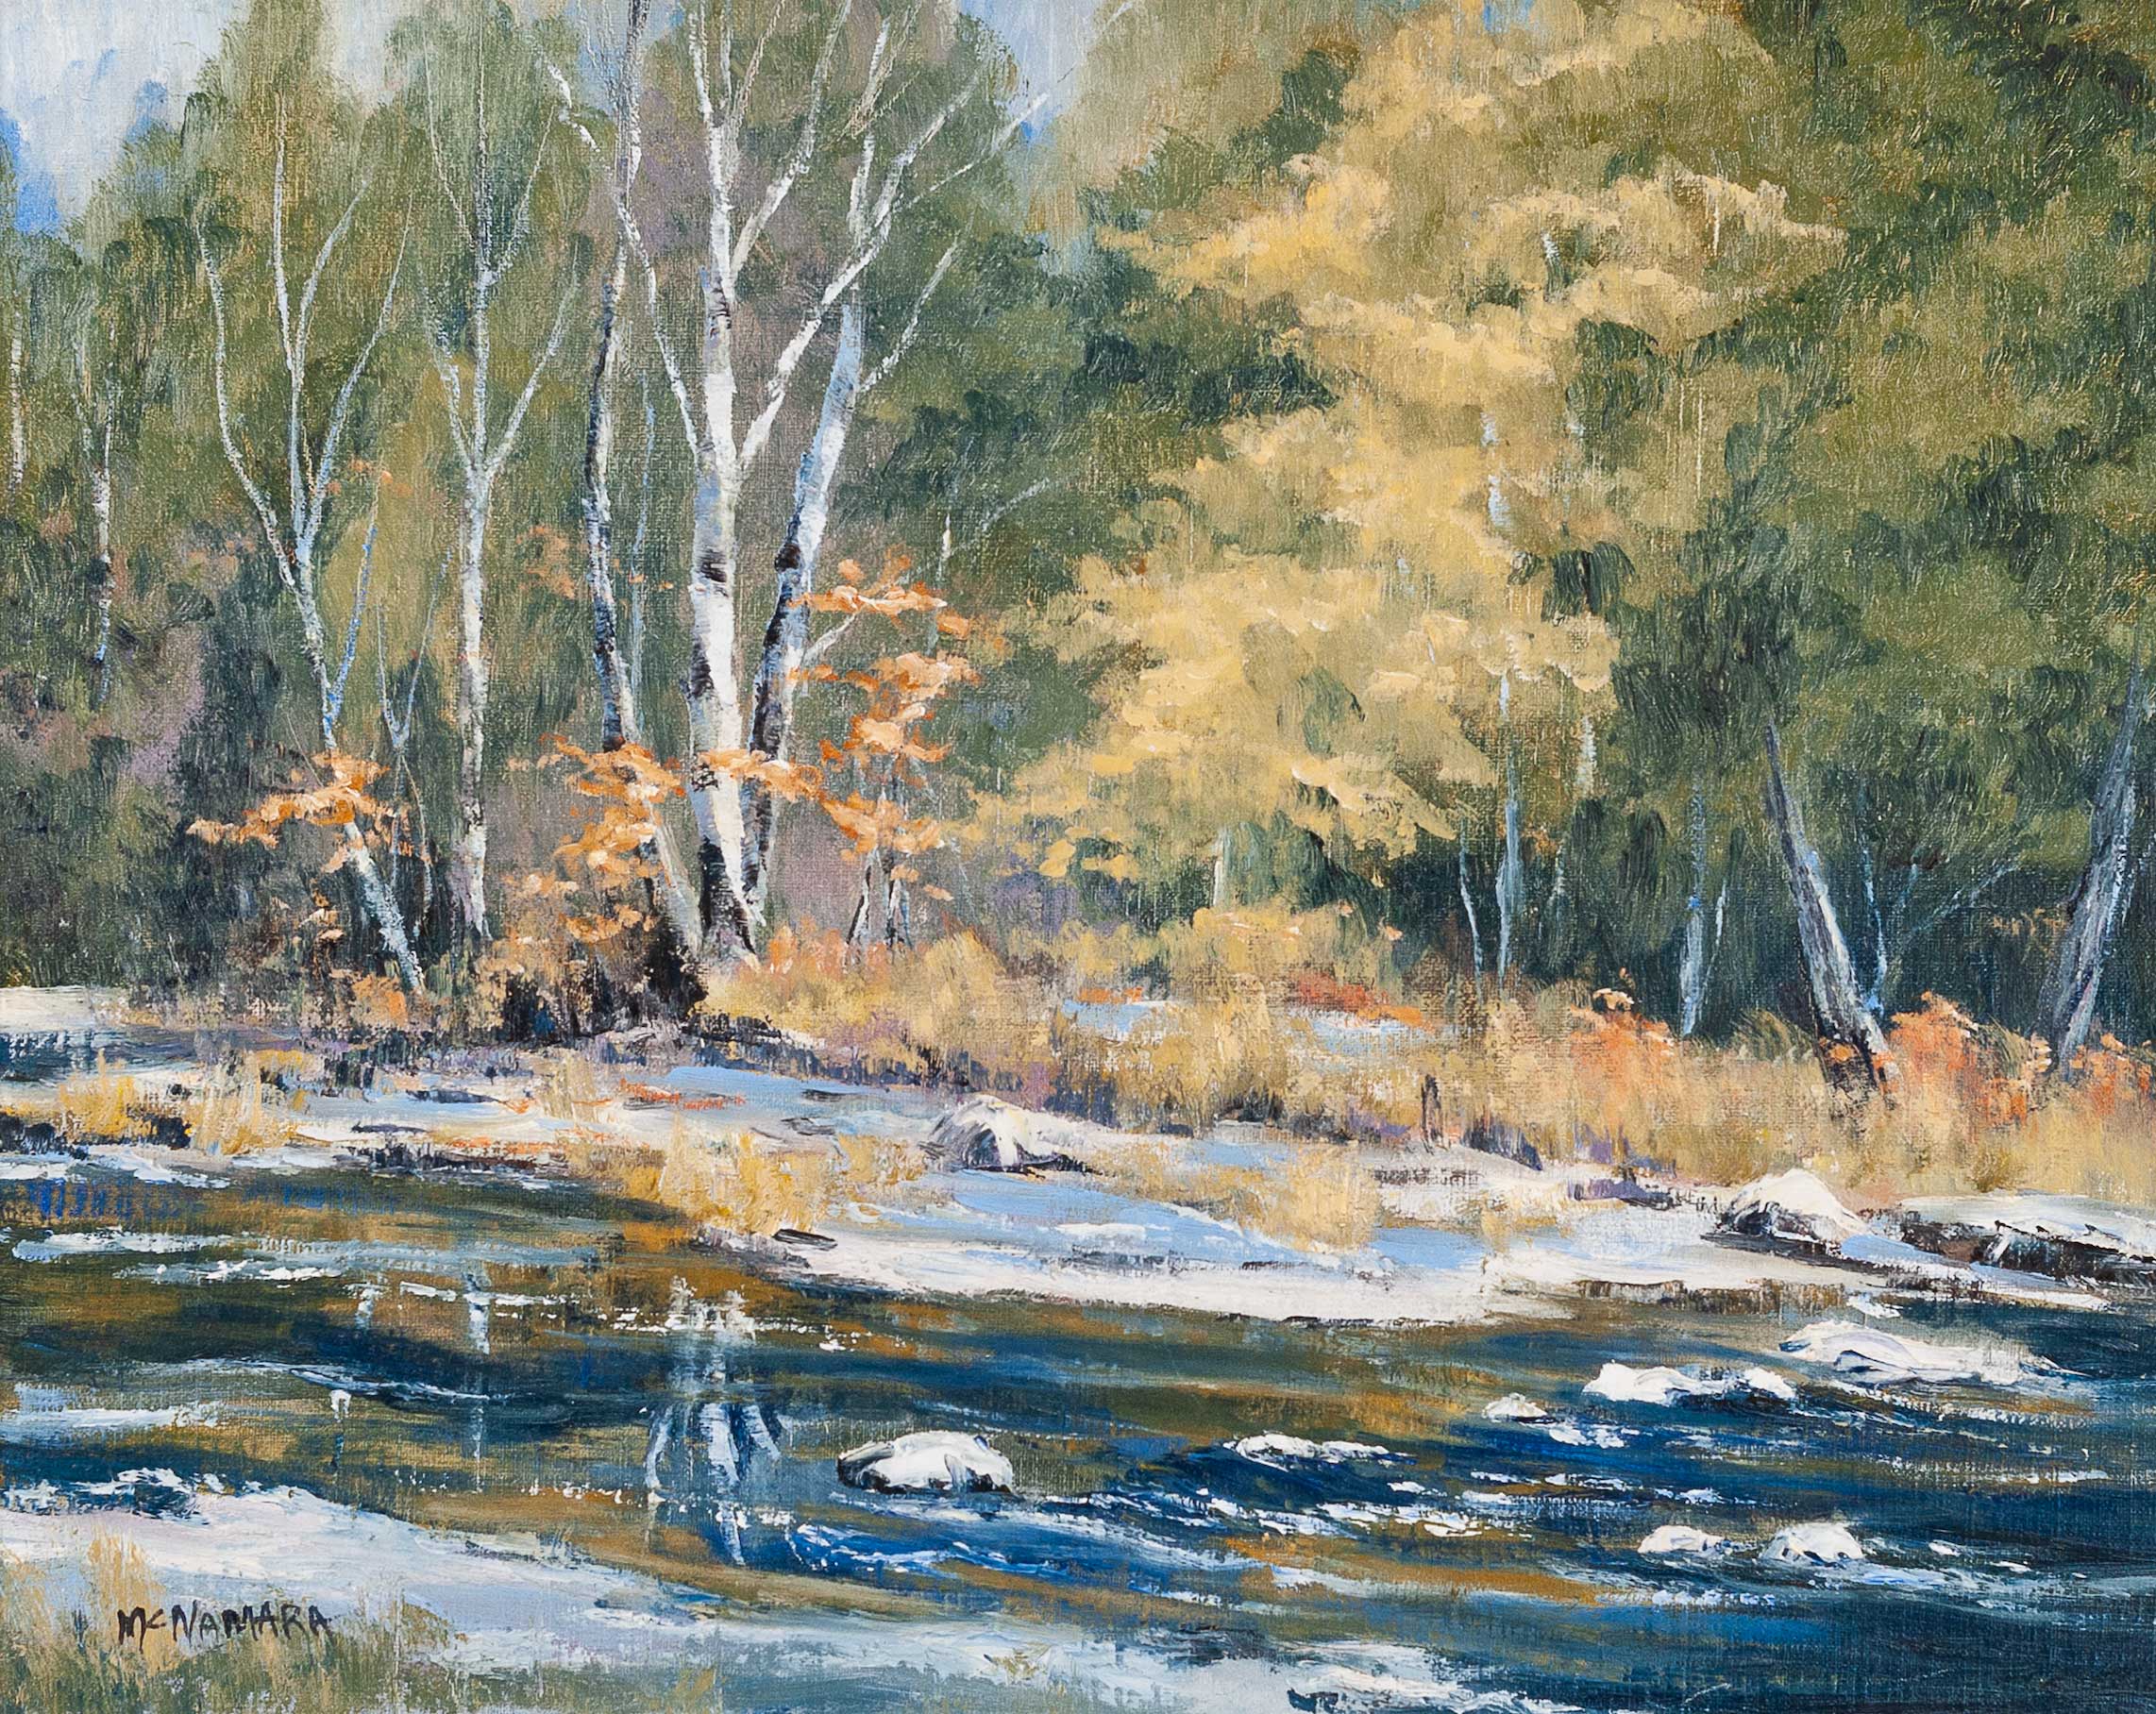 Evelyn McNamara, "Trout Stream," oil on canvas, 1990. (Plein Air from Miller Art Museum Permanent Collection)